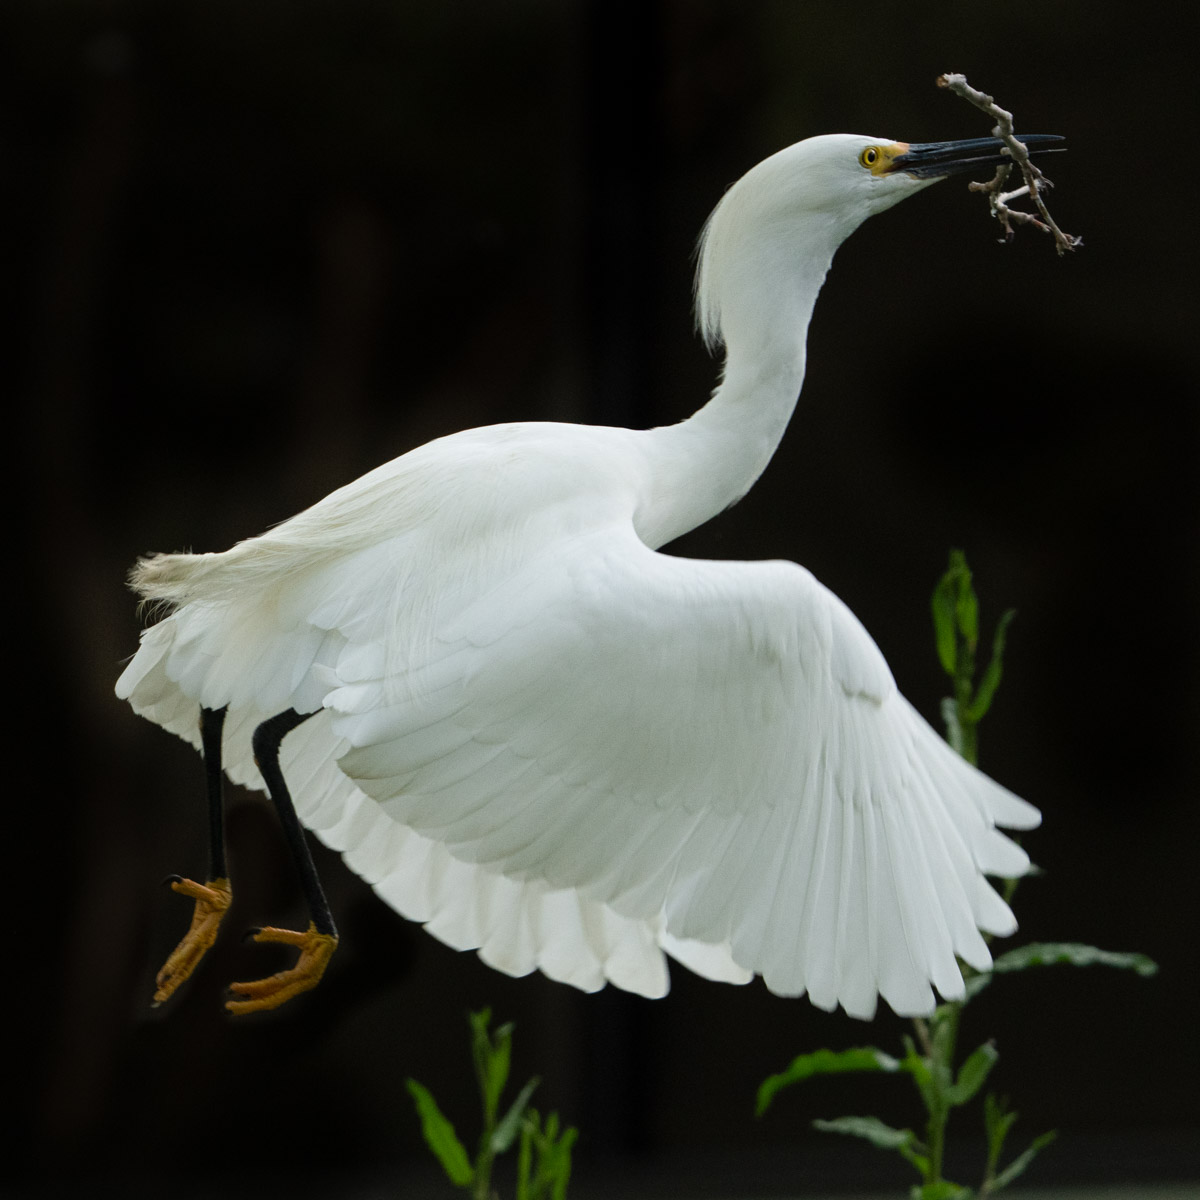 A white bird with a branch in its beak.